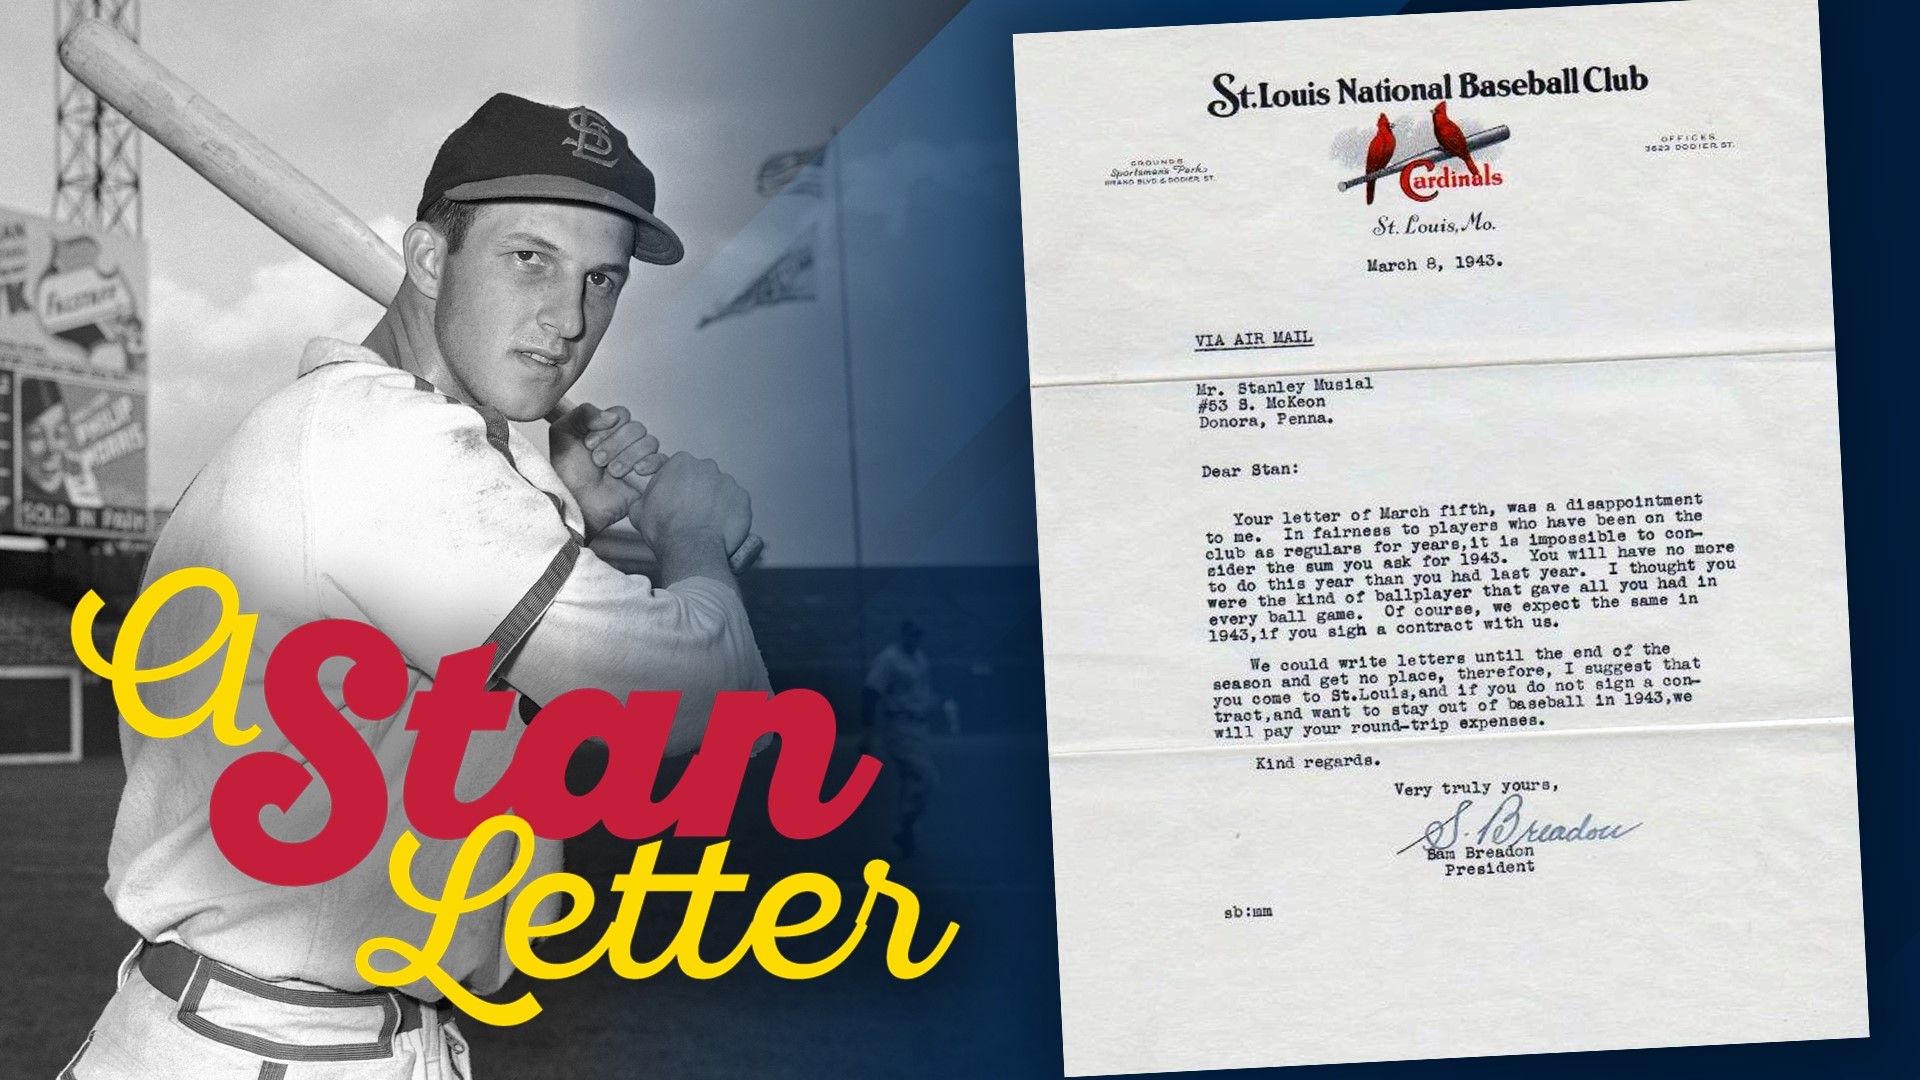 In 1942, Stan Musial made a whopping $4,500. So when the season was over, he asked for a raise. Then-Cardinals owner Sam Breadon disagreed.